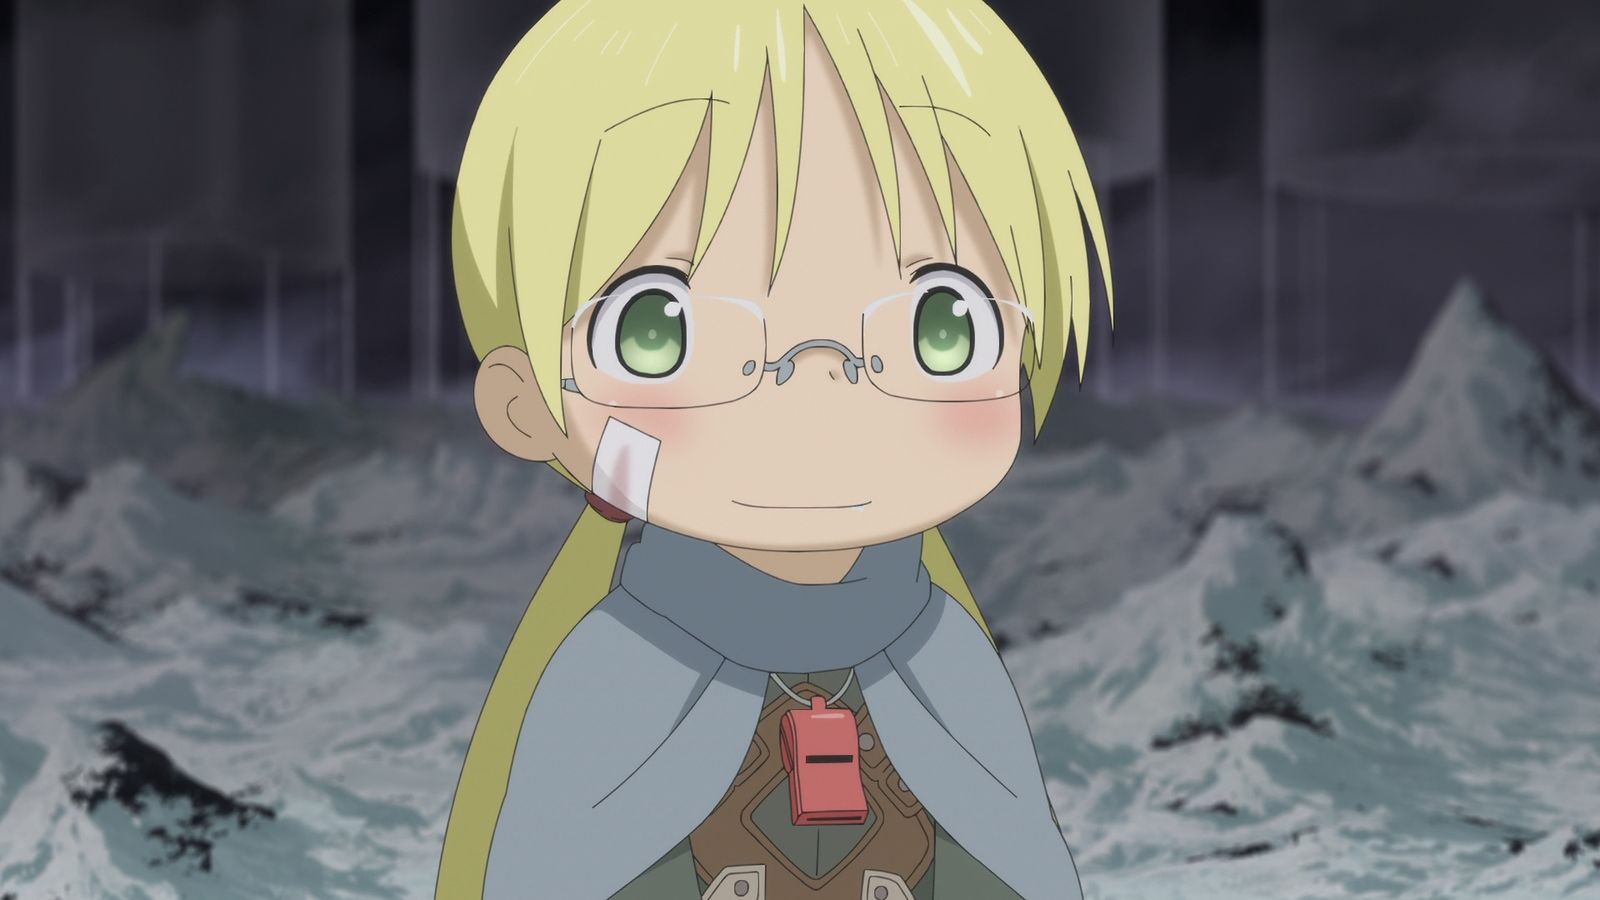 Who are Made in Abyss’ Voice Actors